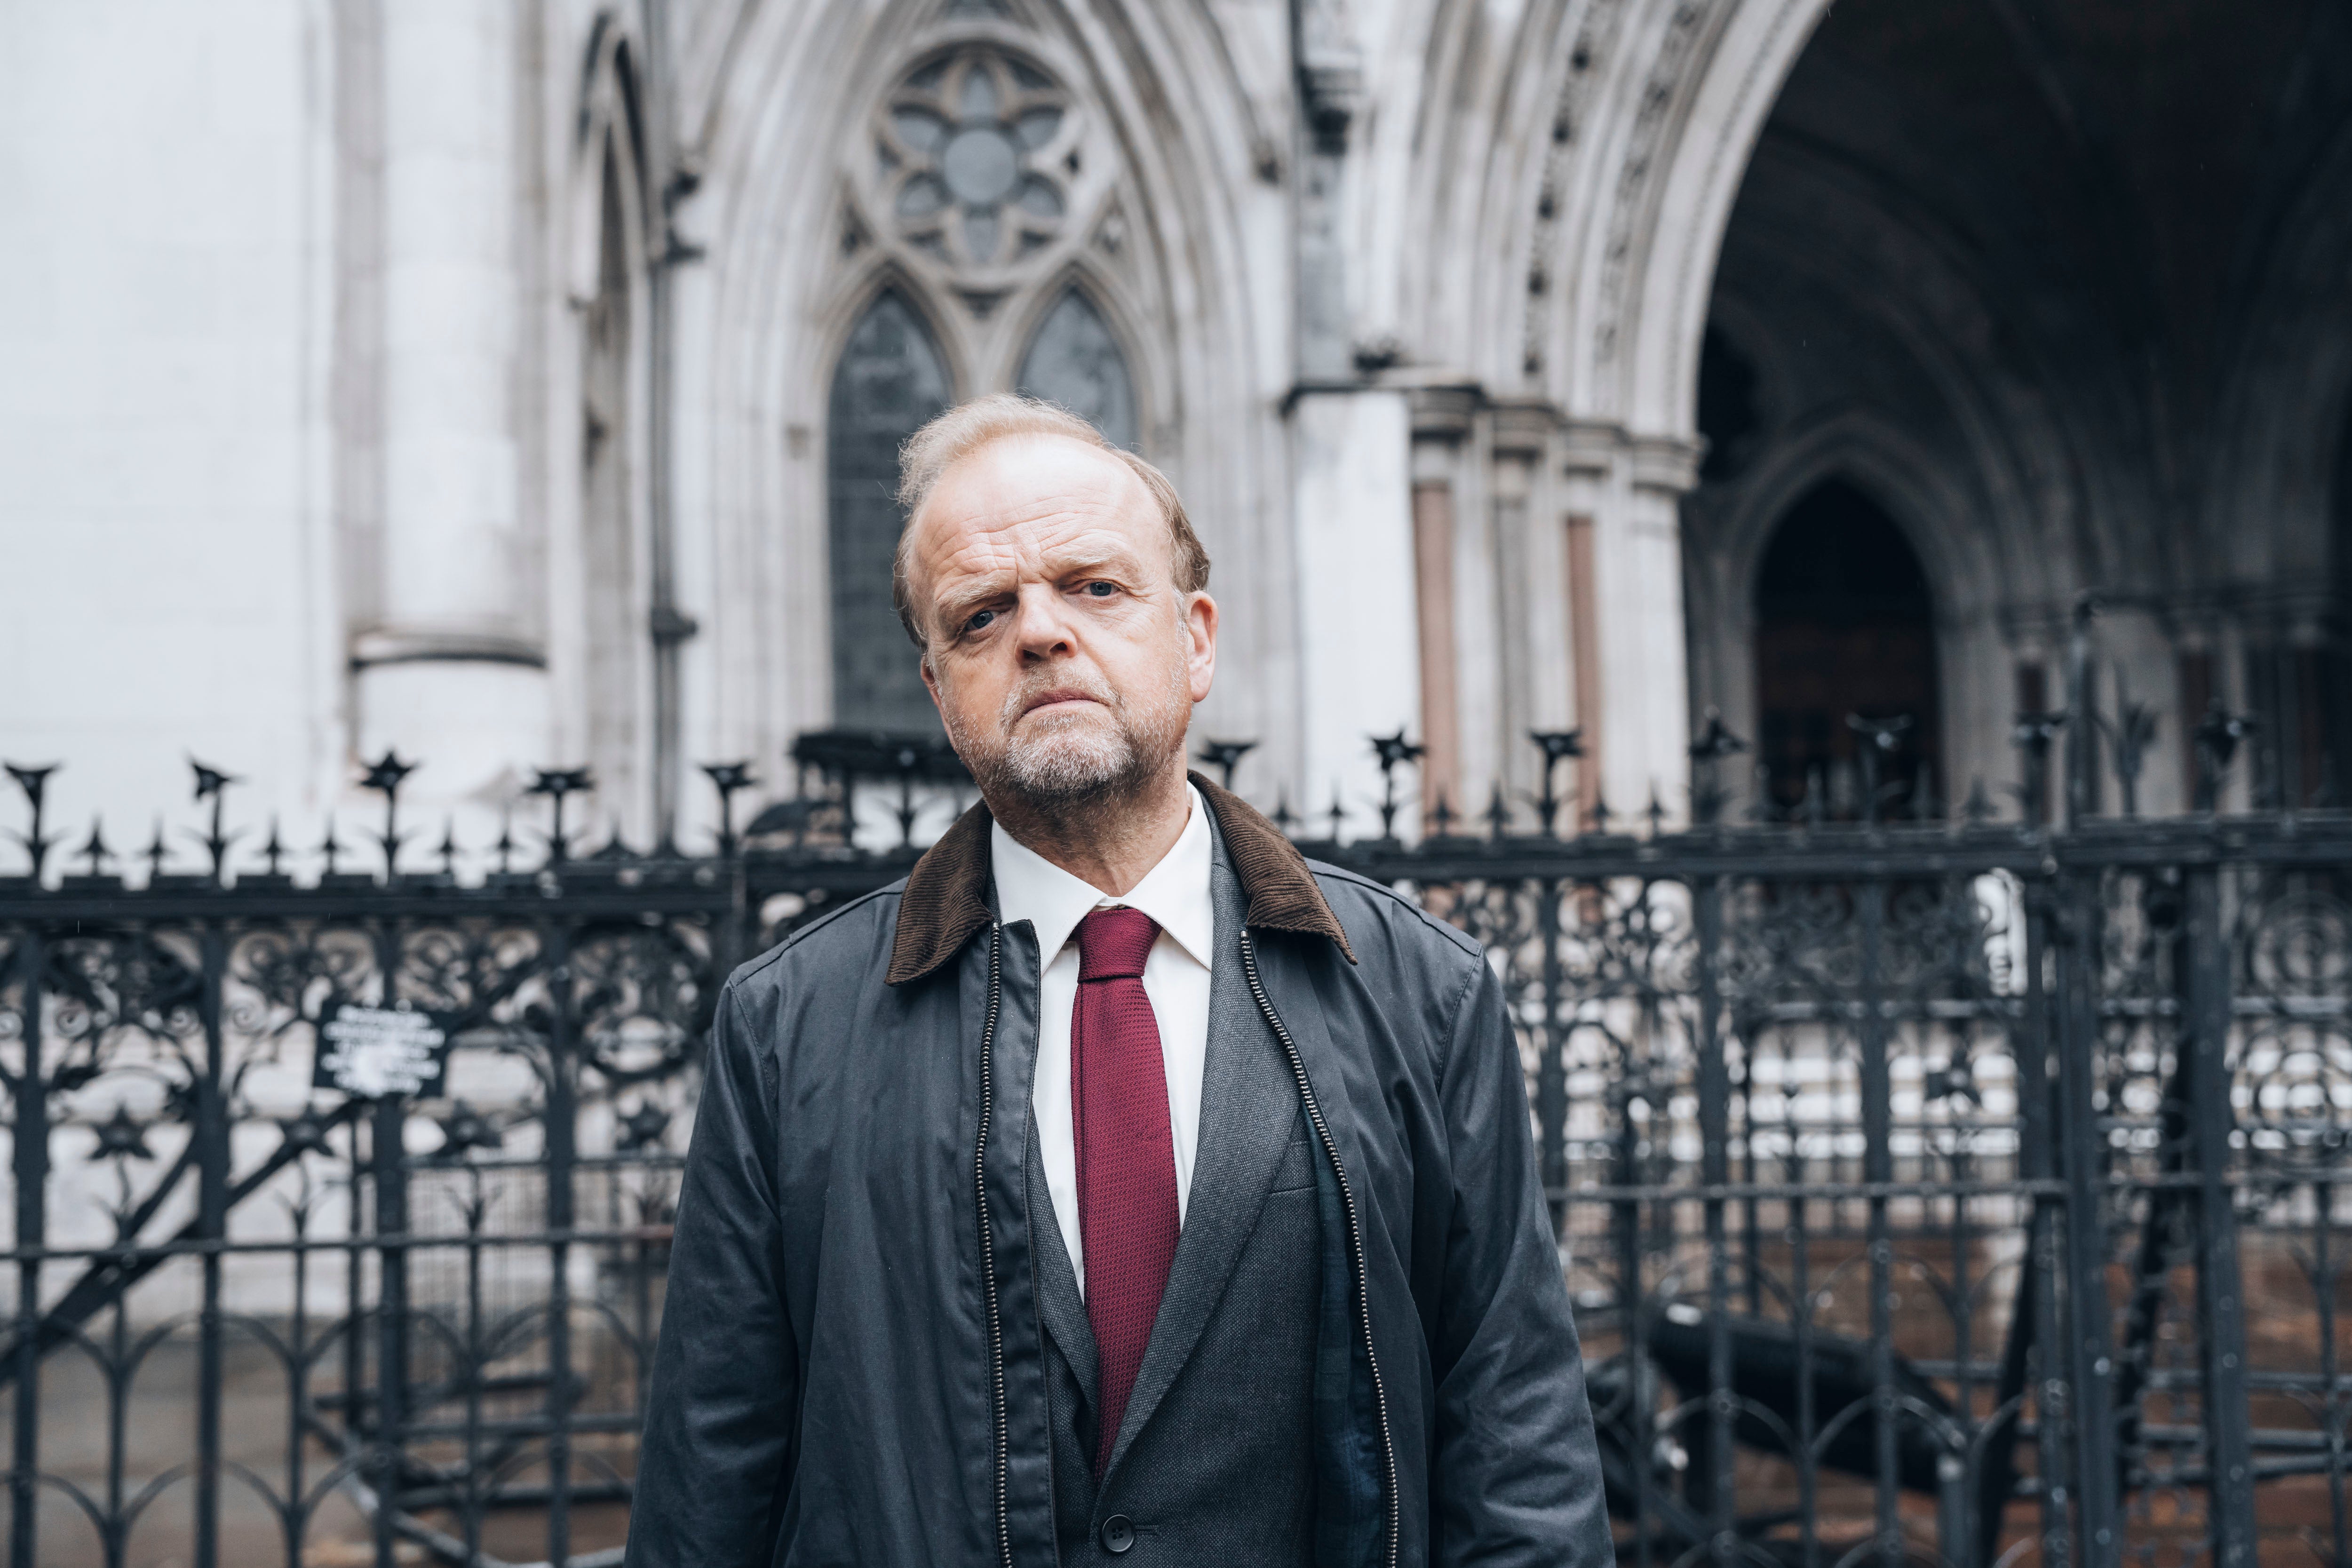 Toby Jones as Alan Bates in the ITV drama ‘Mr Bates vs The Post Office’, which has brought the scandal back into the public eye